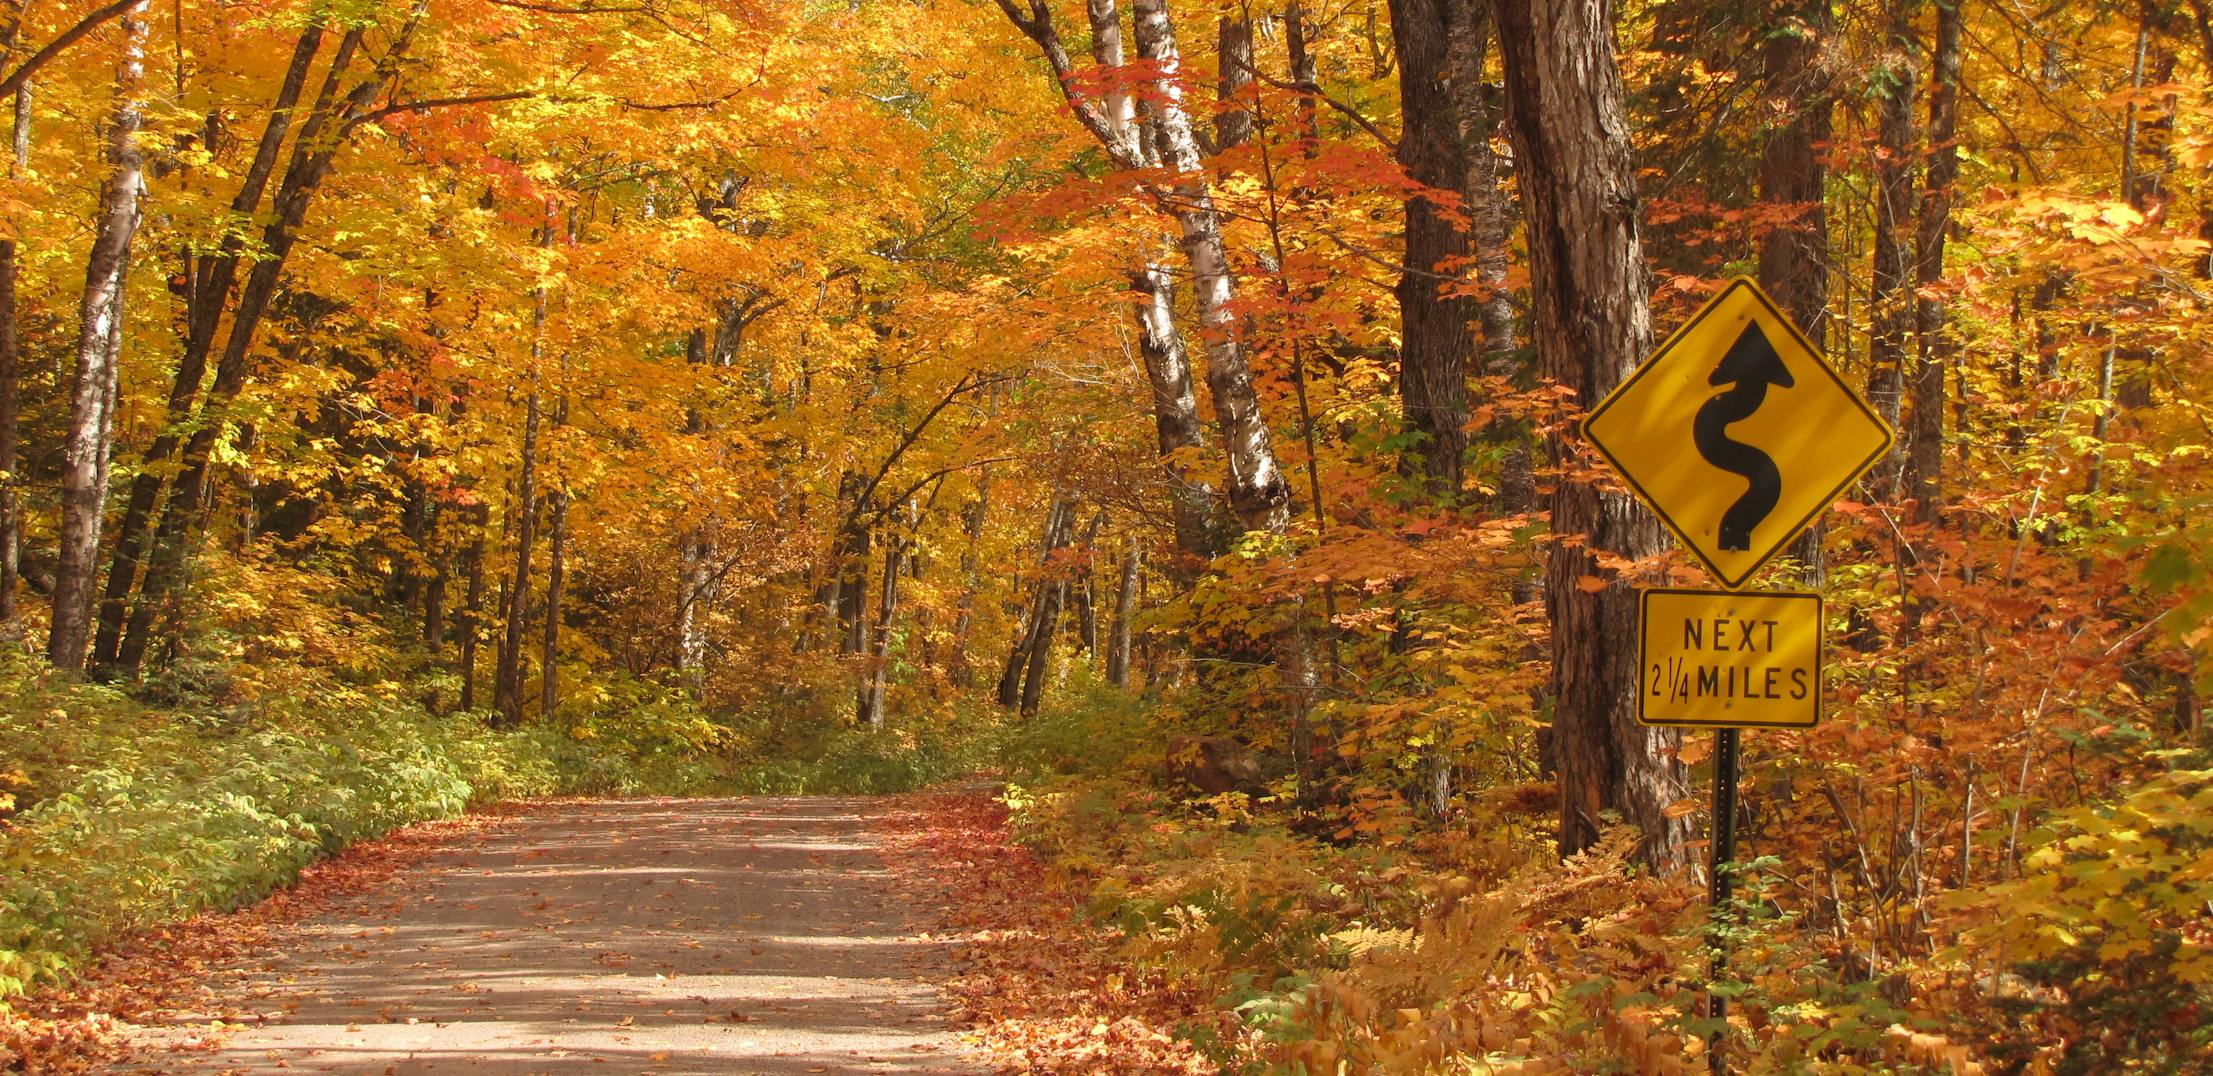 A road leads into Superior National Forest, featuring fall foliage colors of orange and yellow.